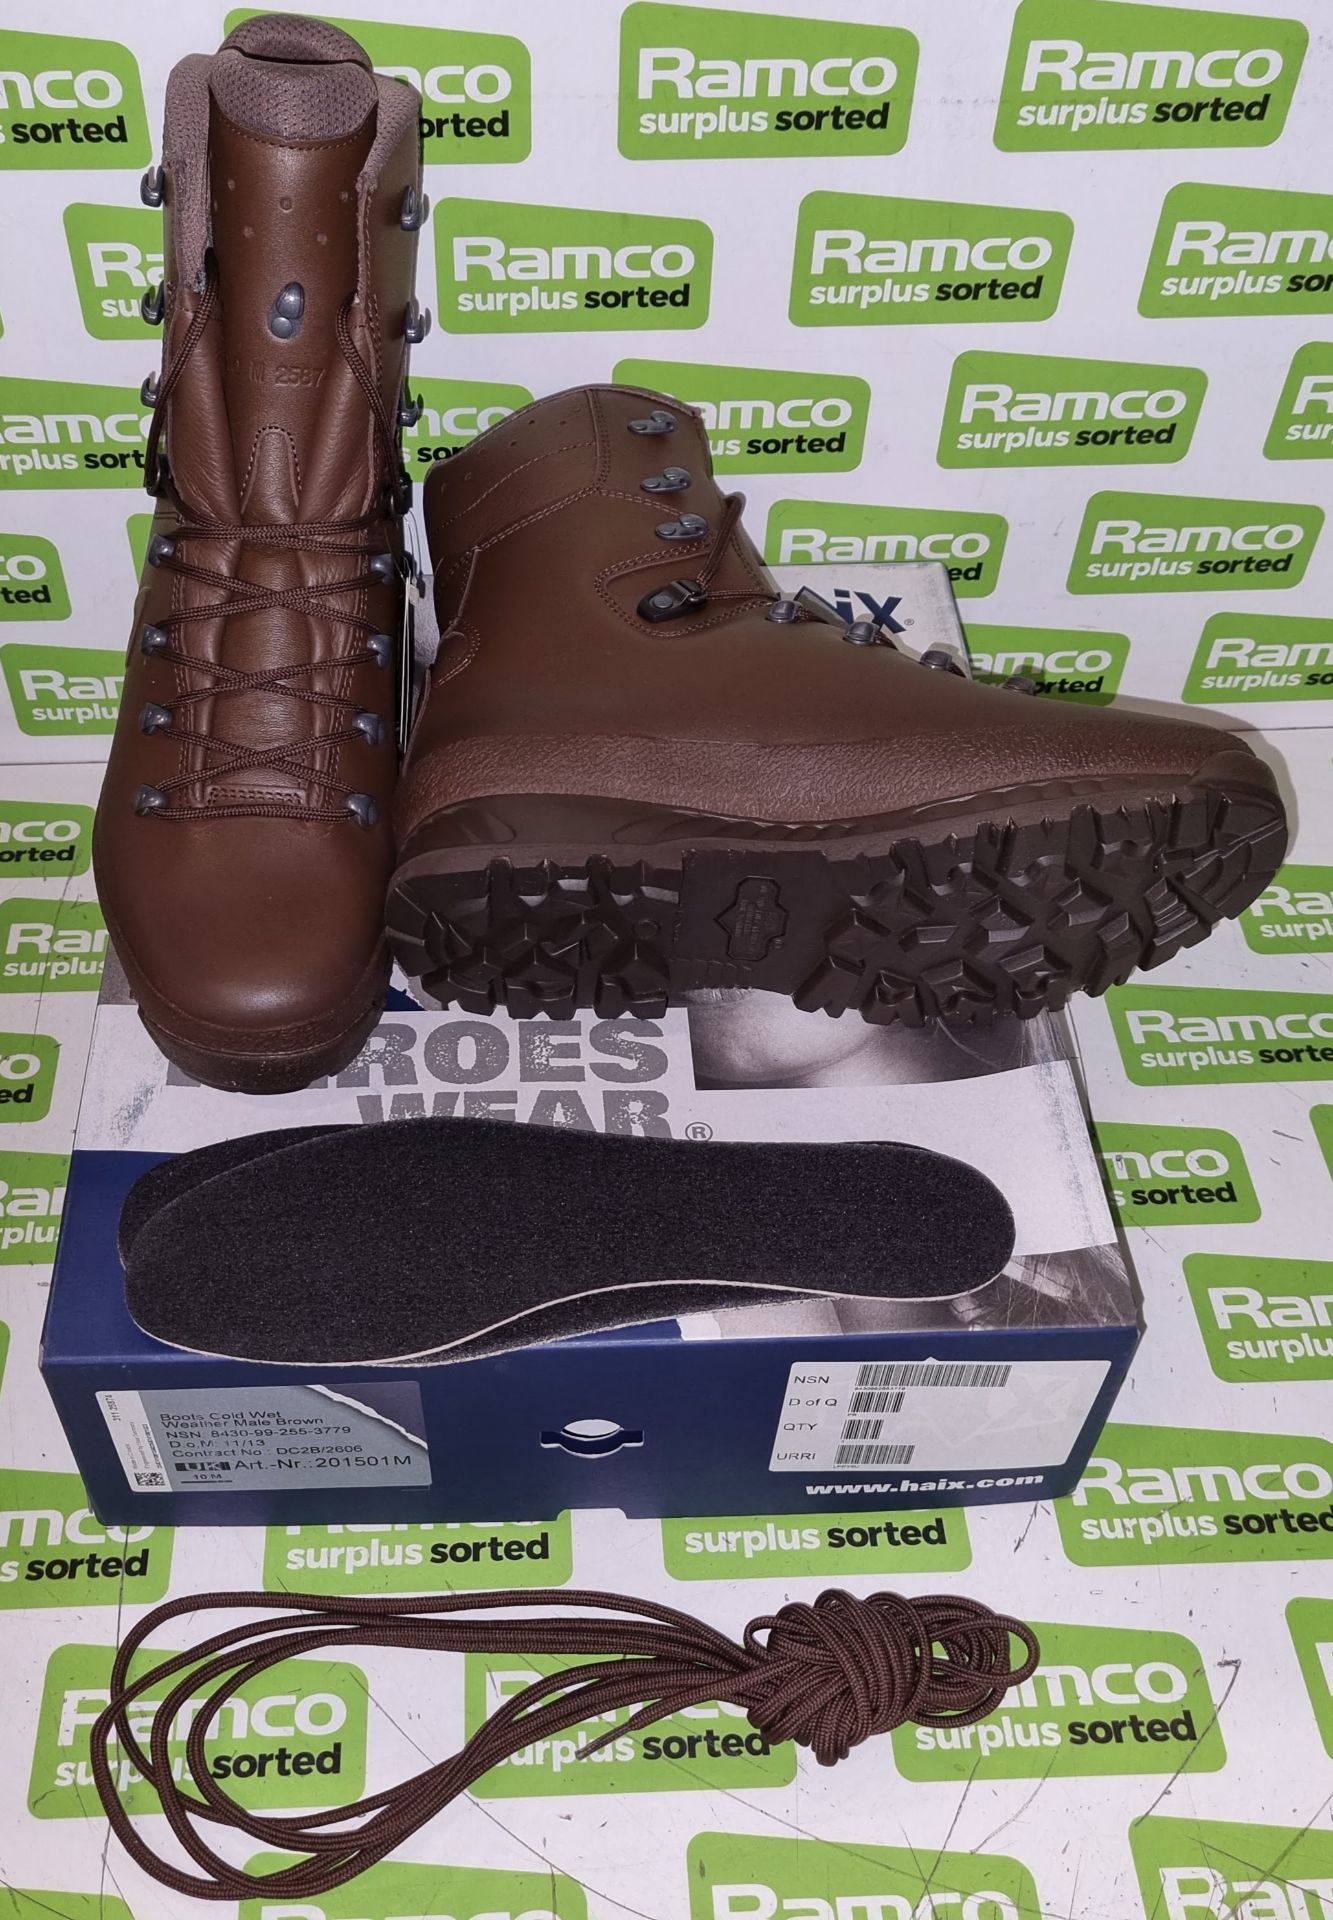 5x pairs of Haix cold wet weather boots - Size 10M